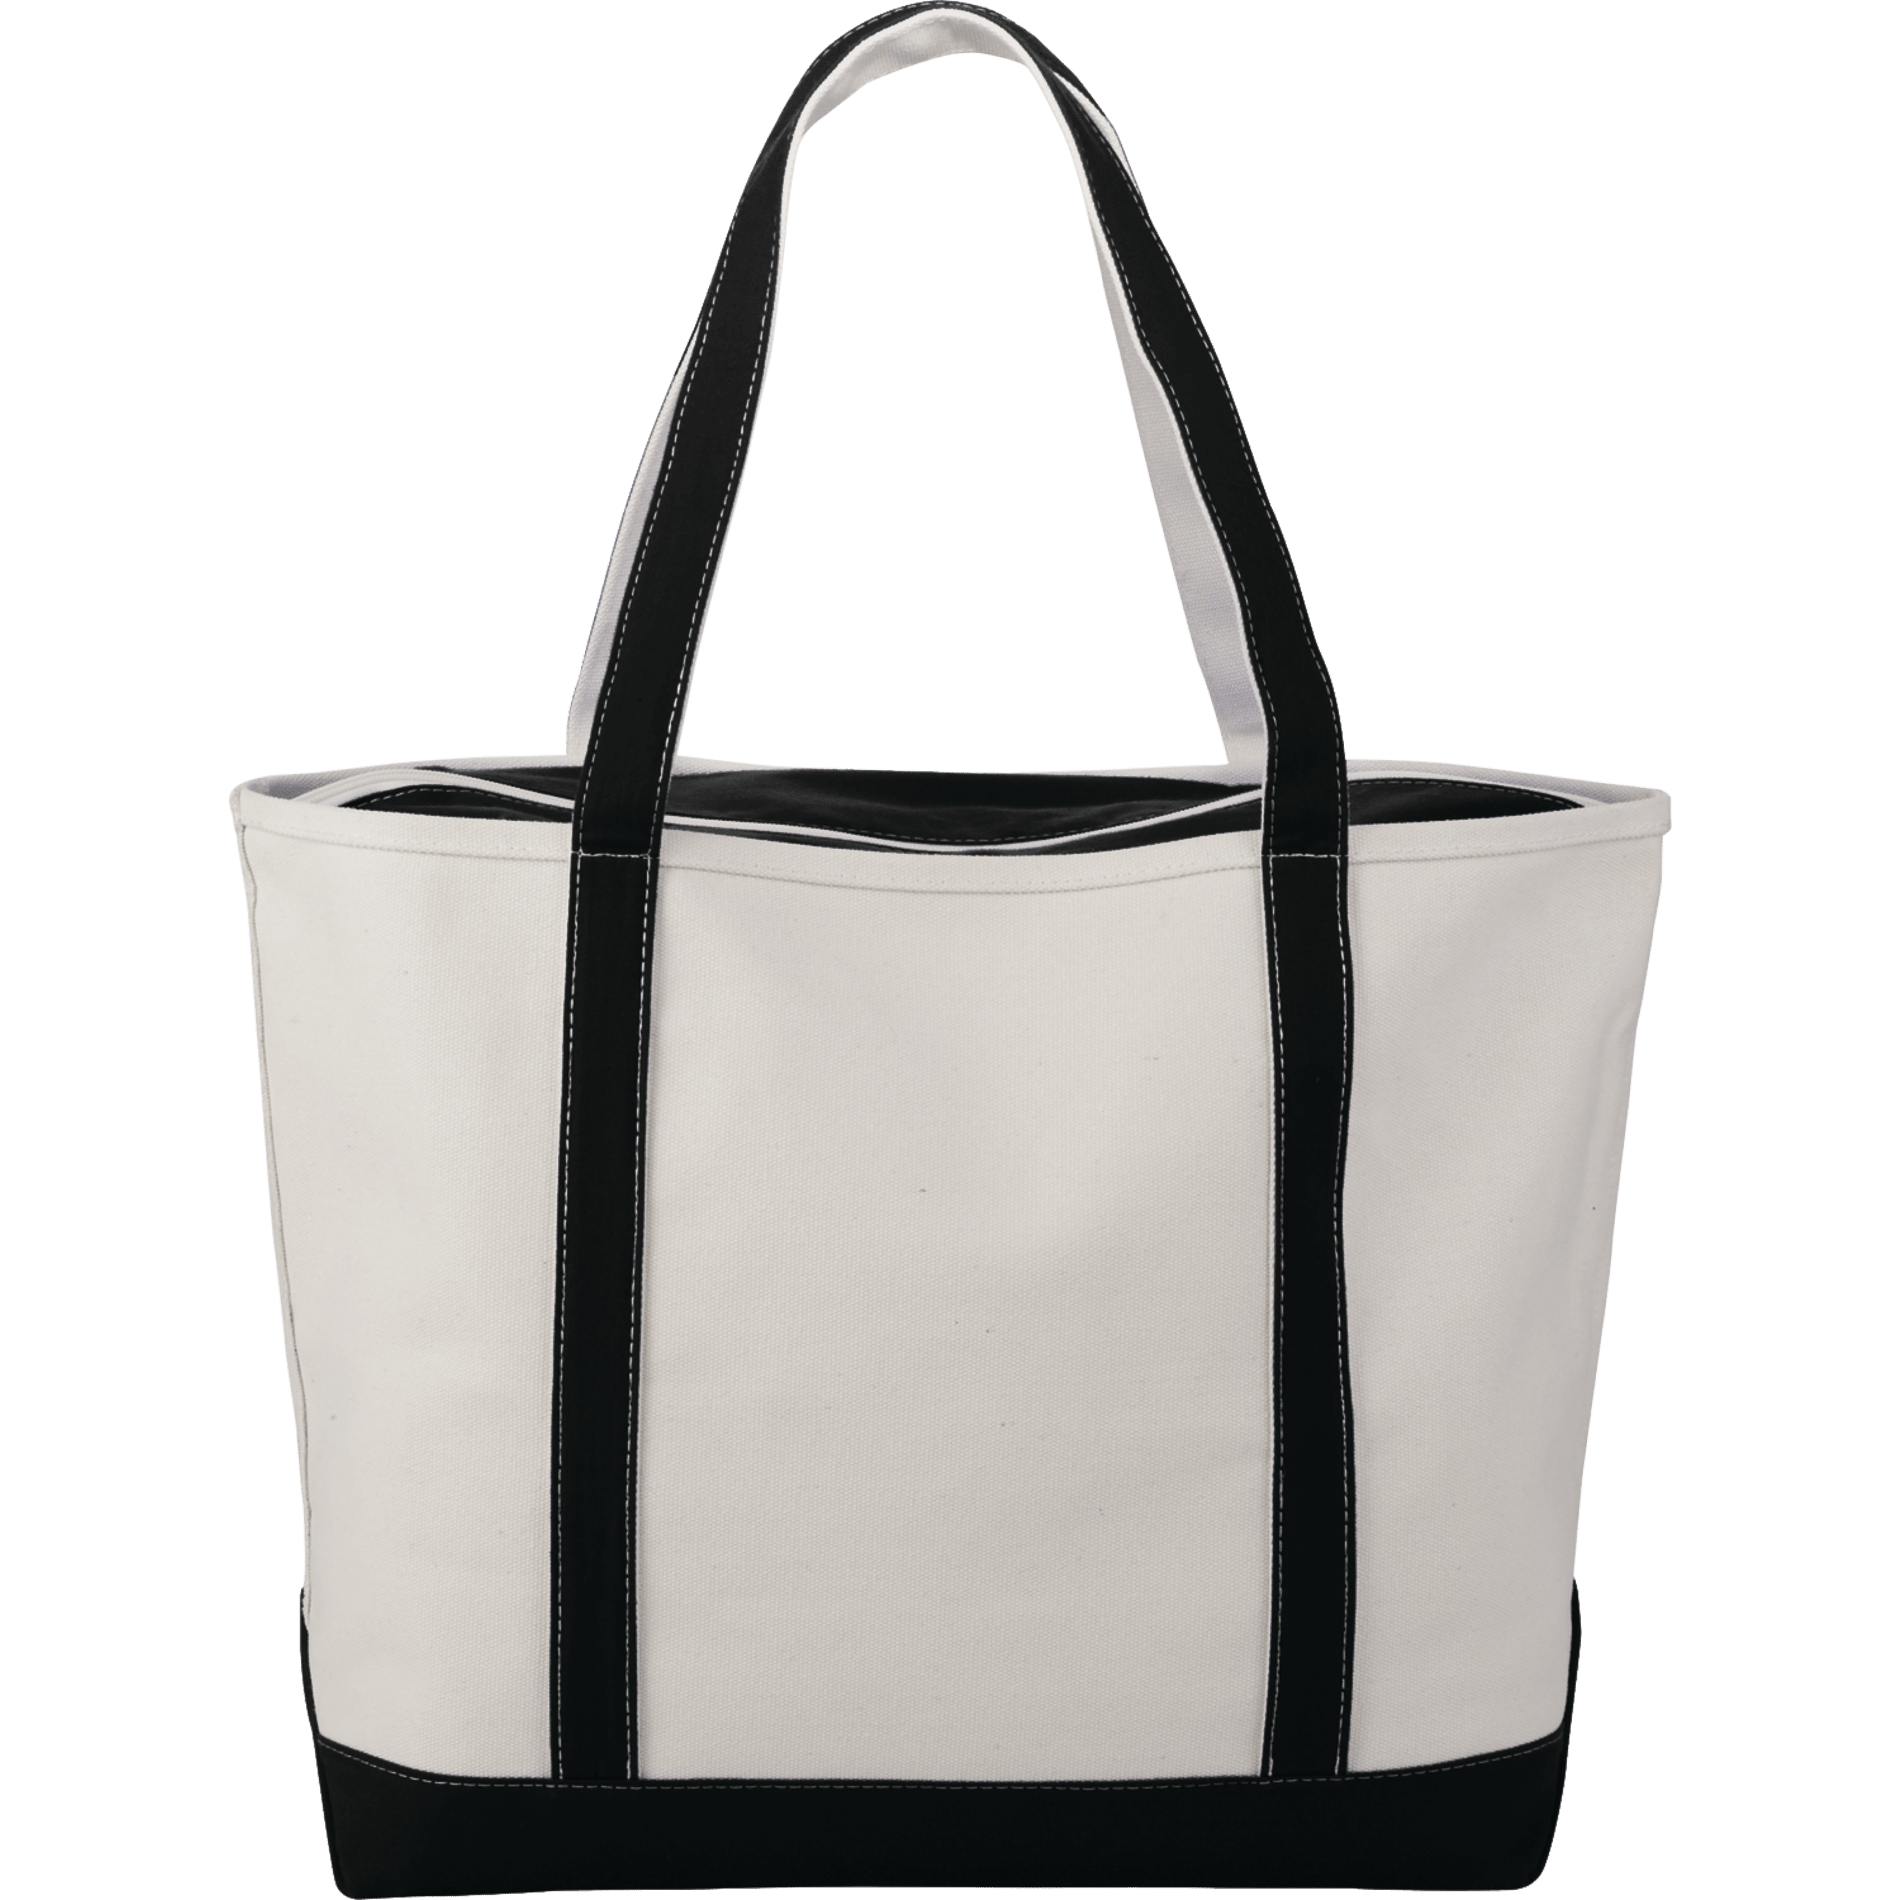 LEEDS 2160-67 - Baltic 24oz Cotton Canvas Tall Zippered Boat Tote